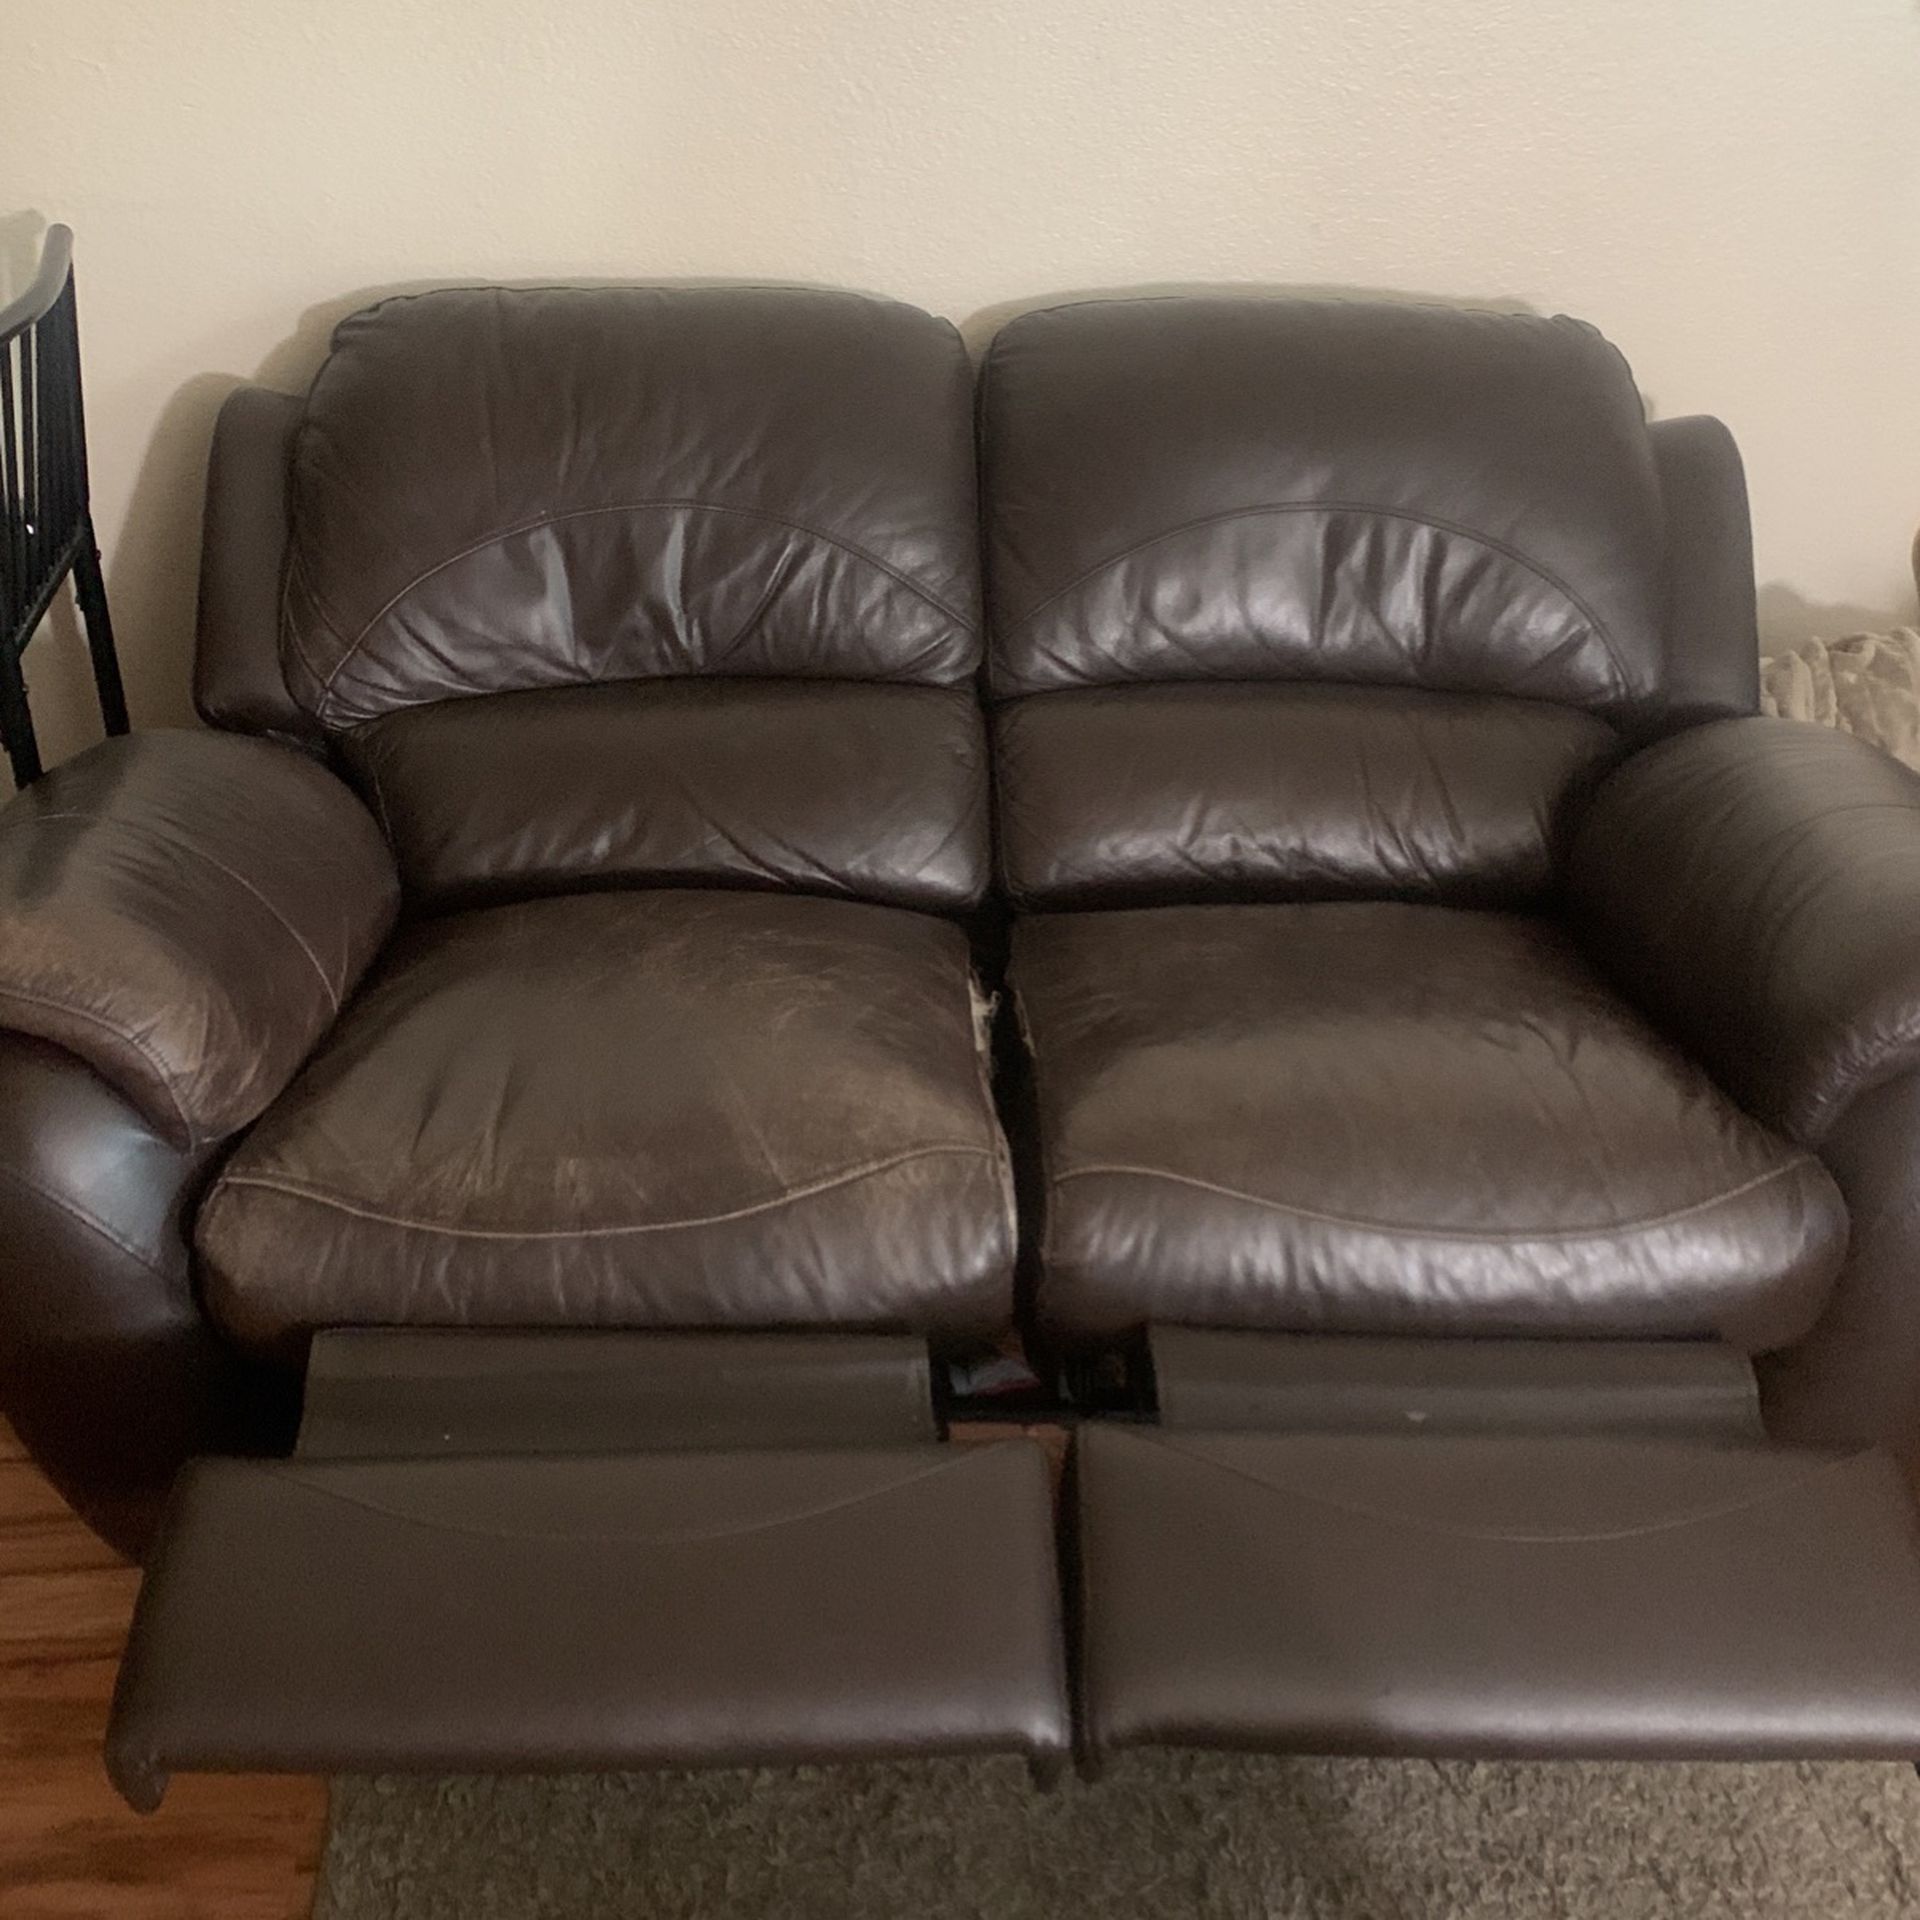 2 Person Recliner Chair